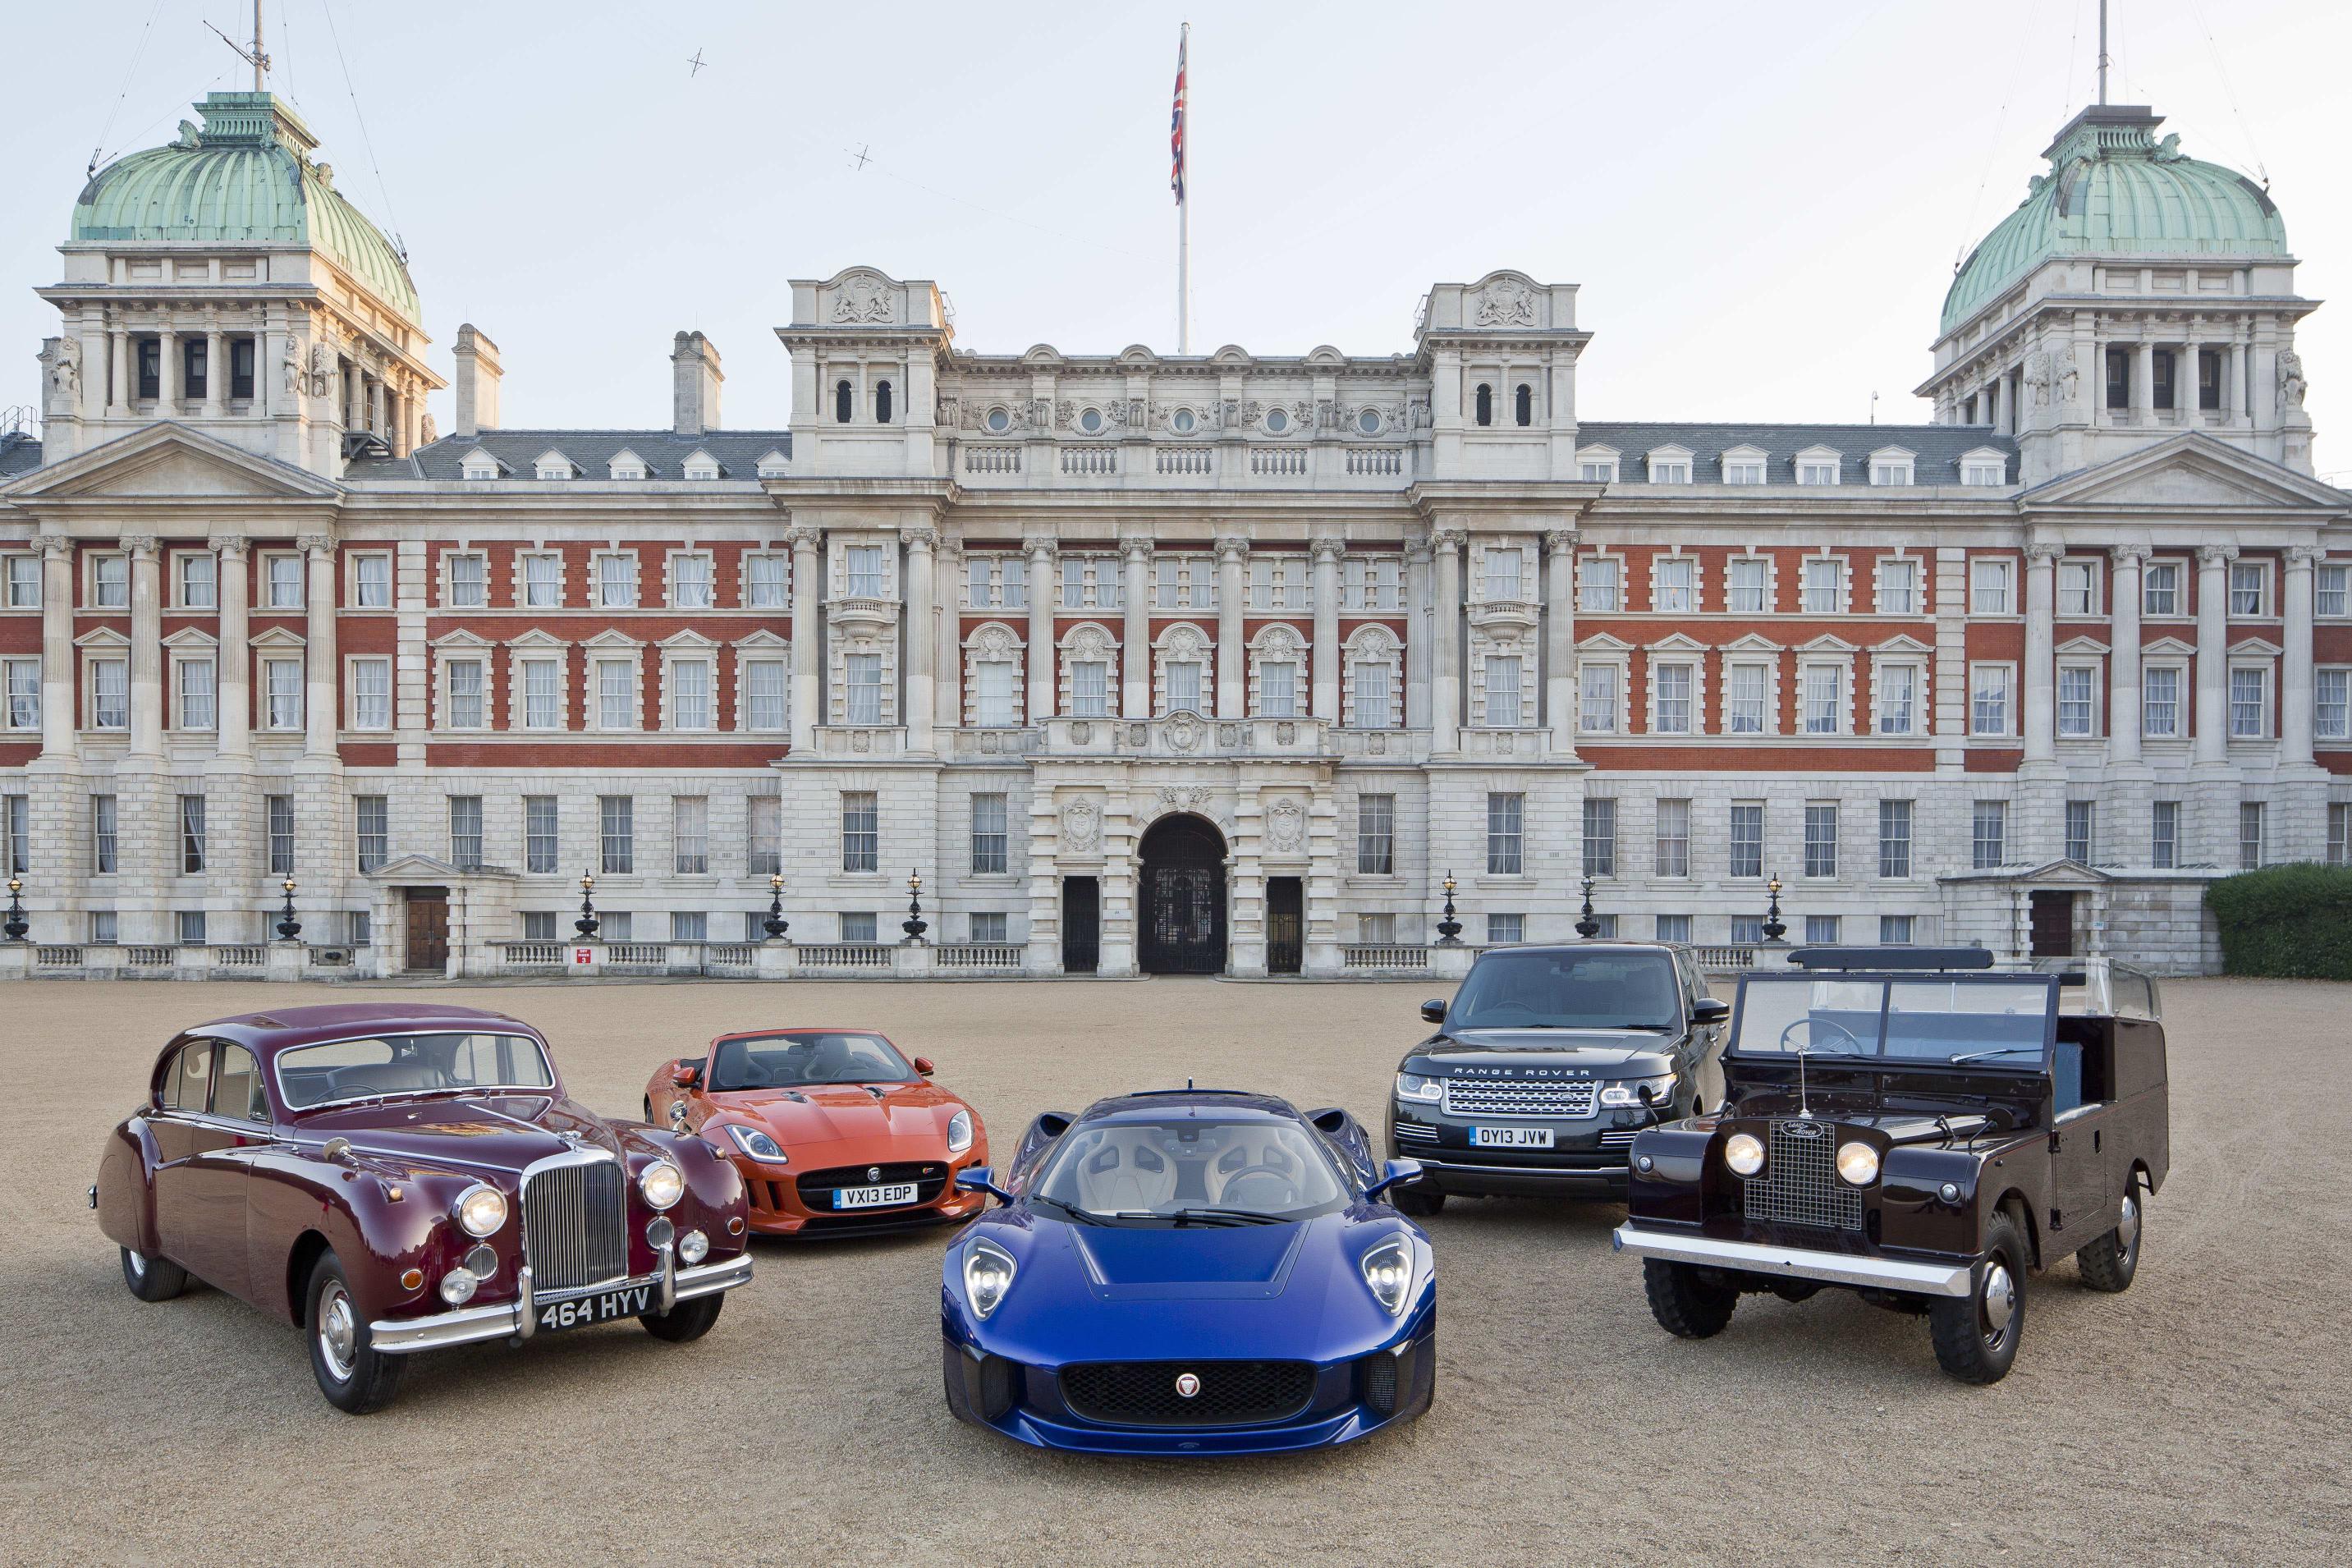 From classic to current, a few of the Royal Family's favorite rides in front of Admiralty House.